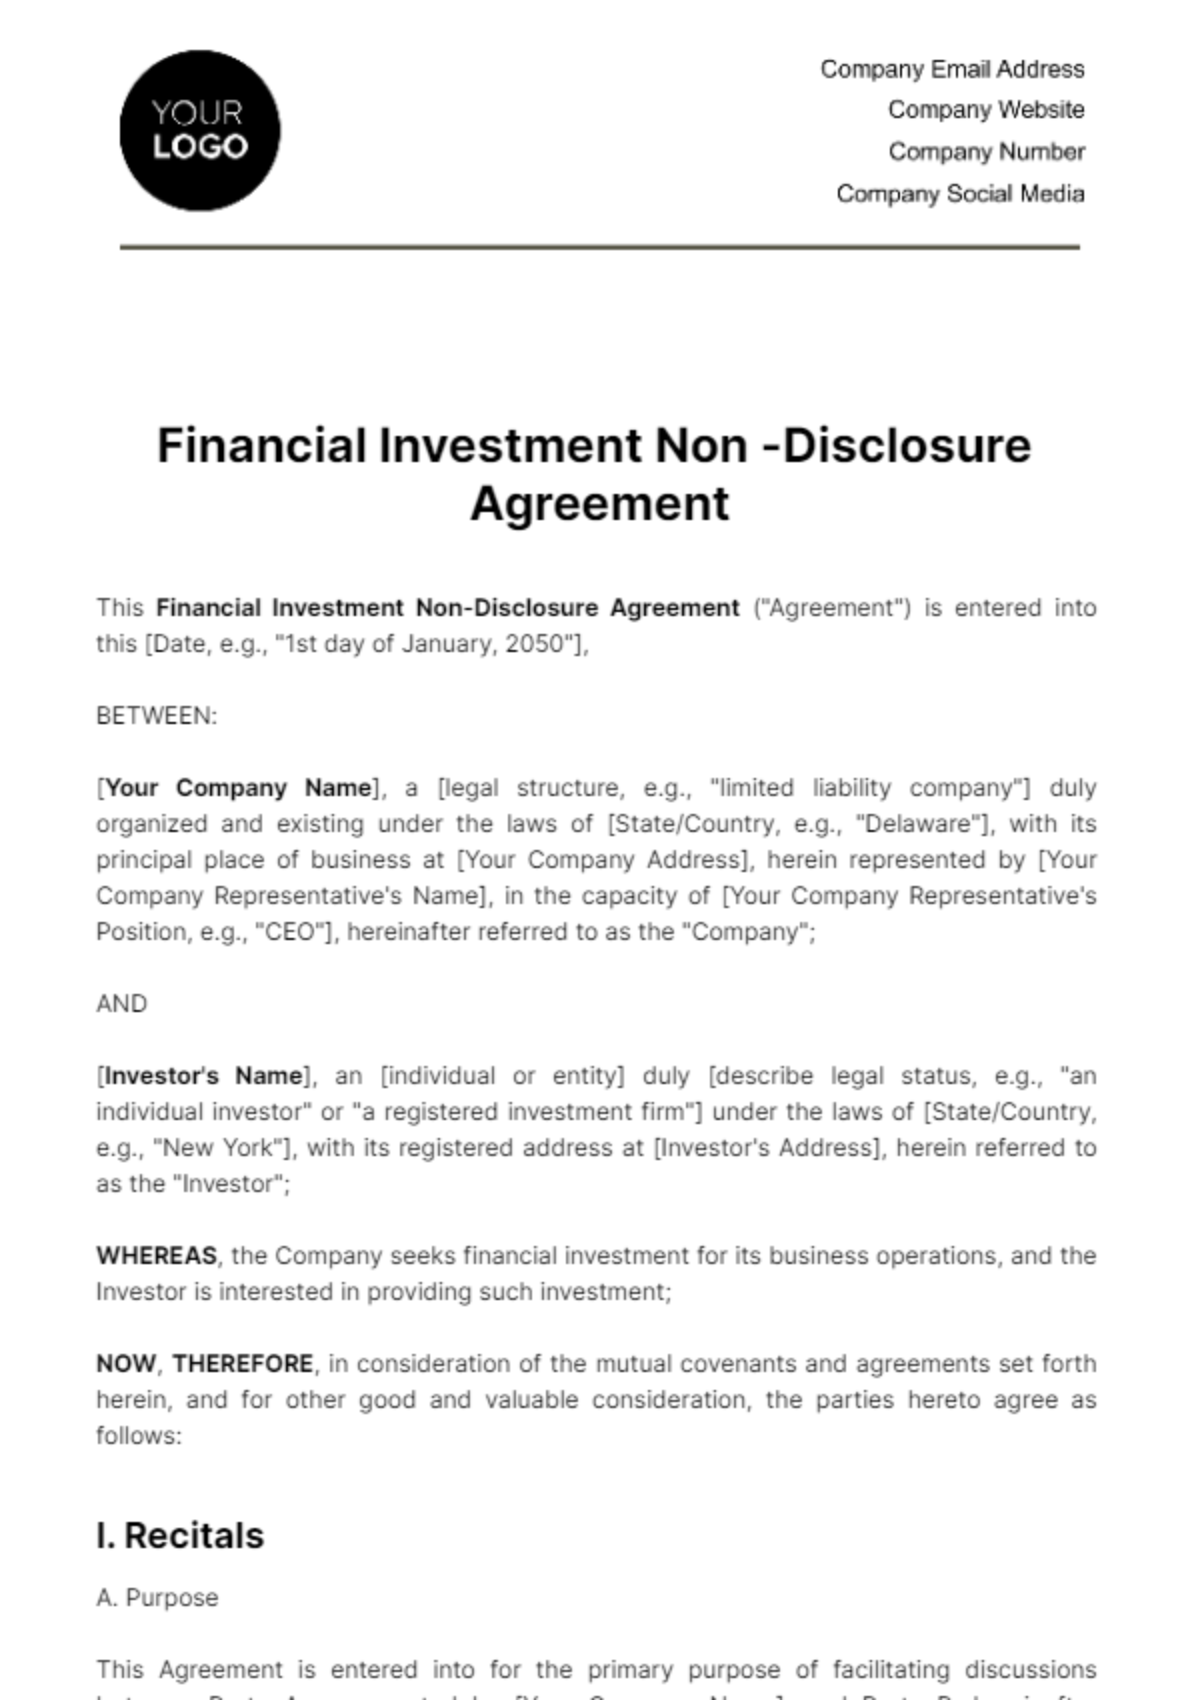 Free Financial Investment Non-Disclosure Agreement Template